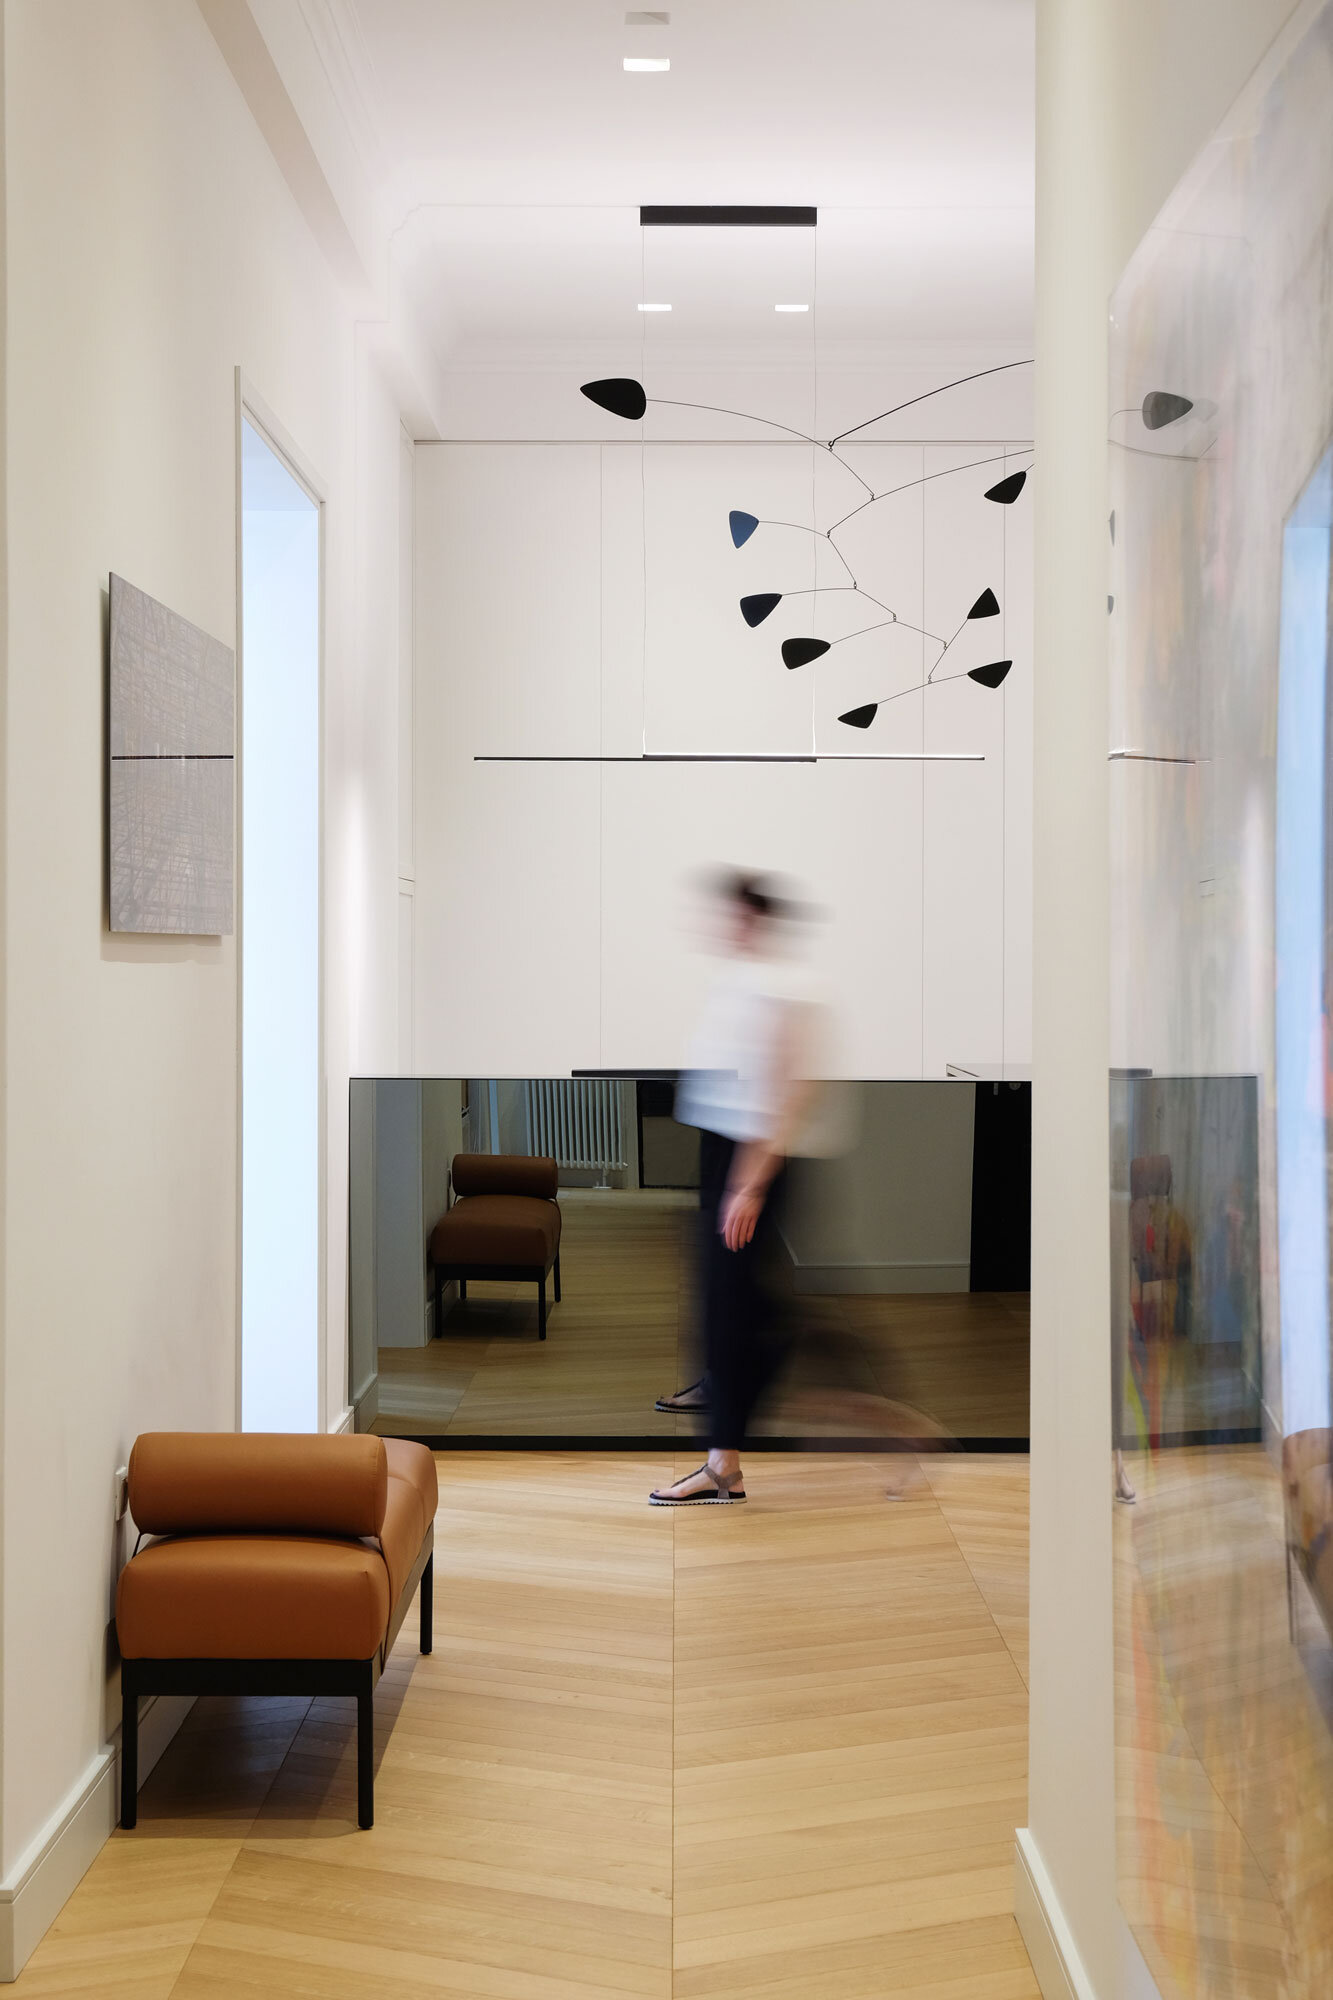  Investment company offices in Athens,  Met Studio  